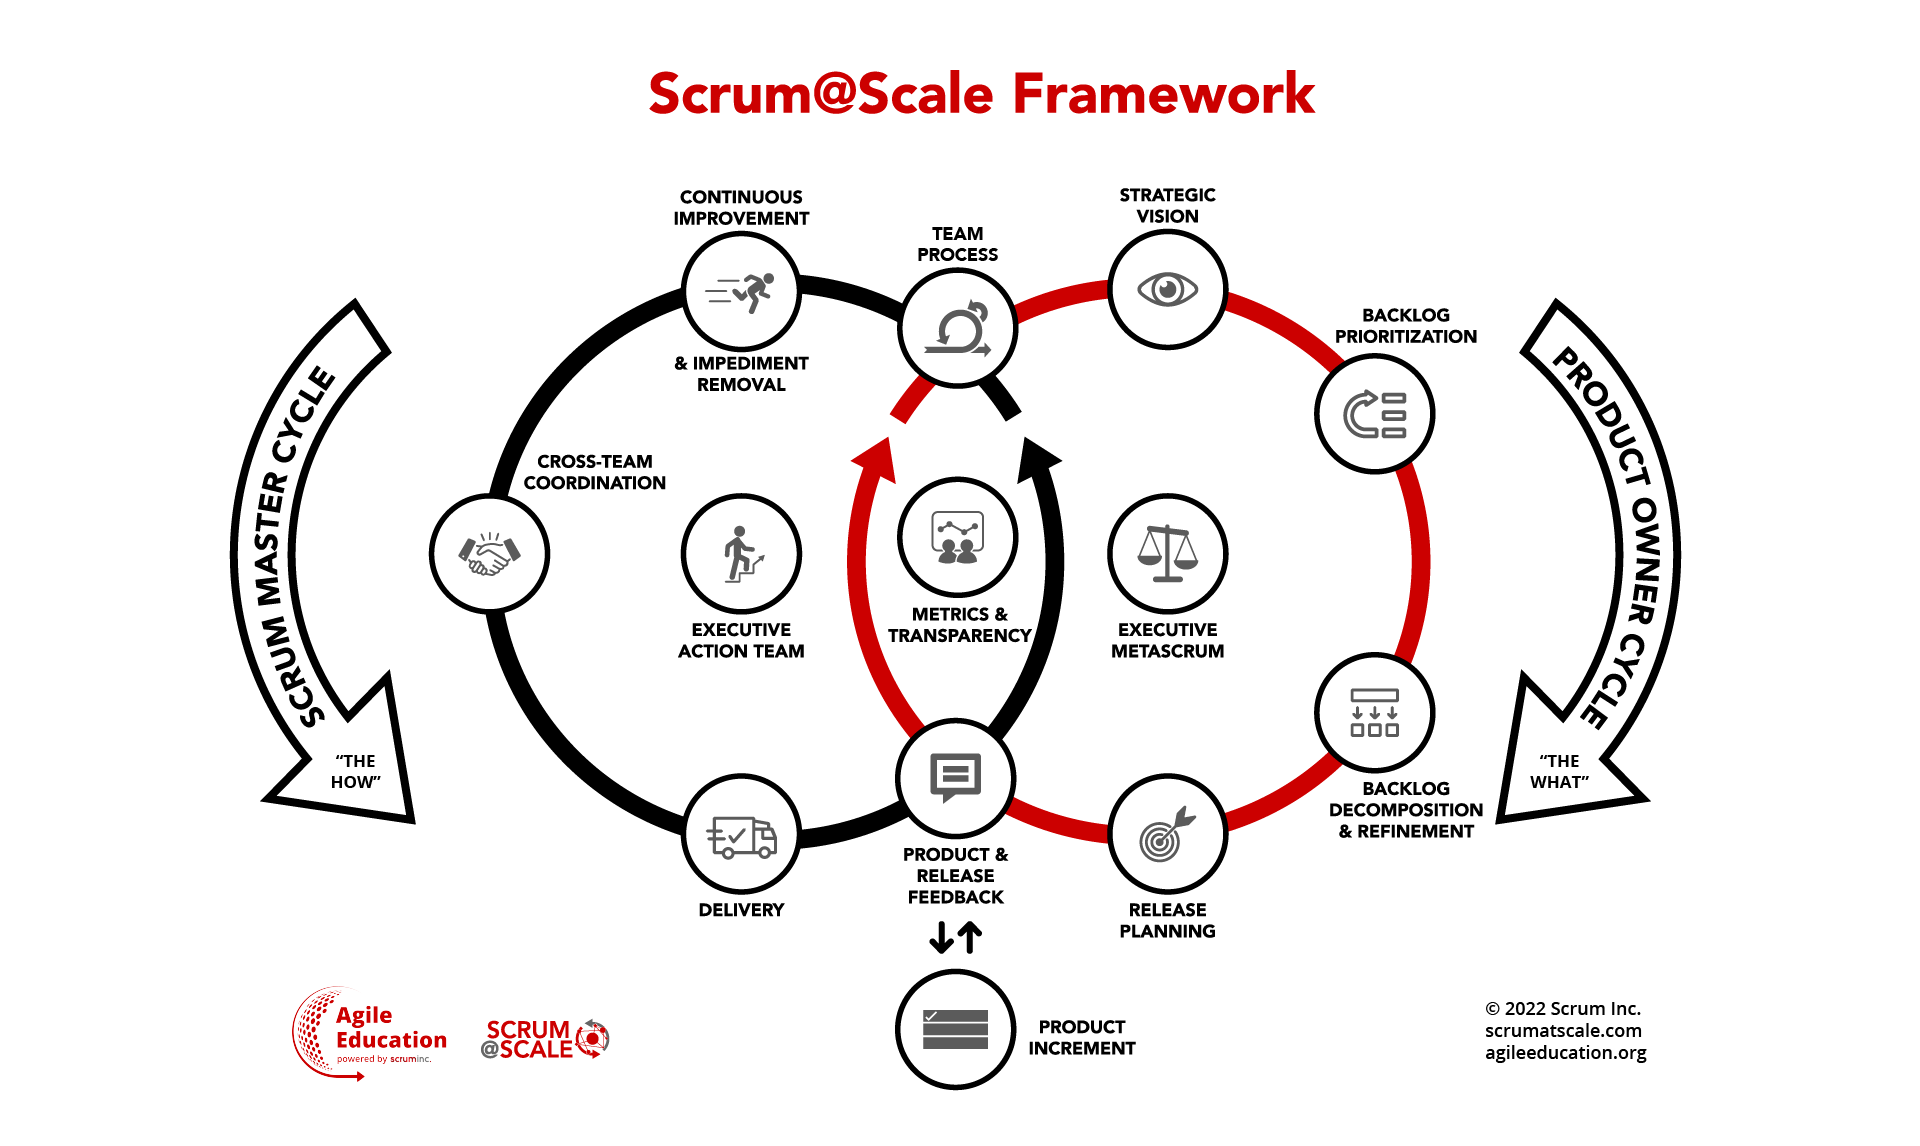 What is Scrum@scale?